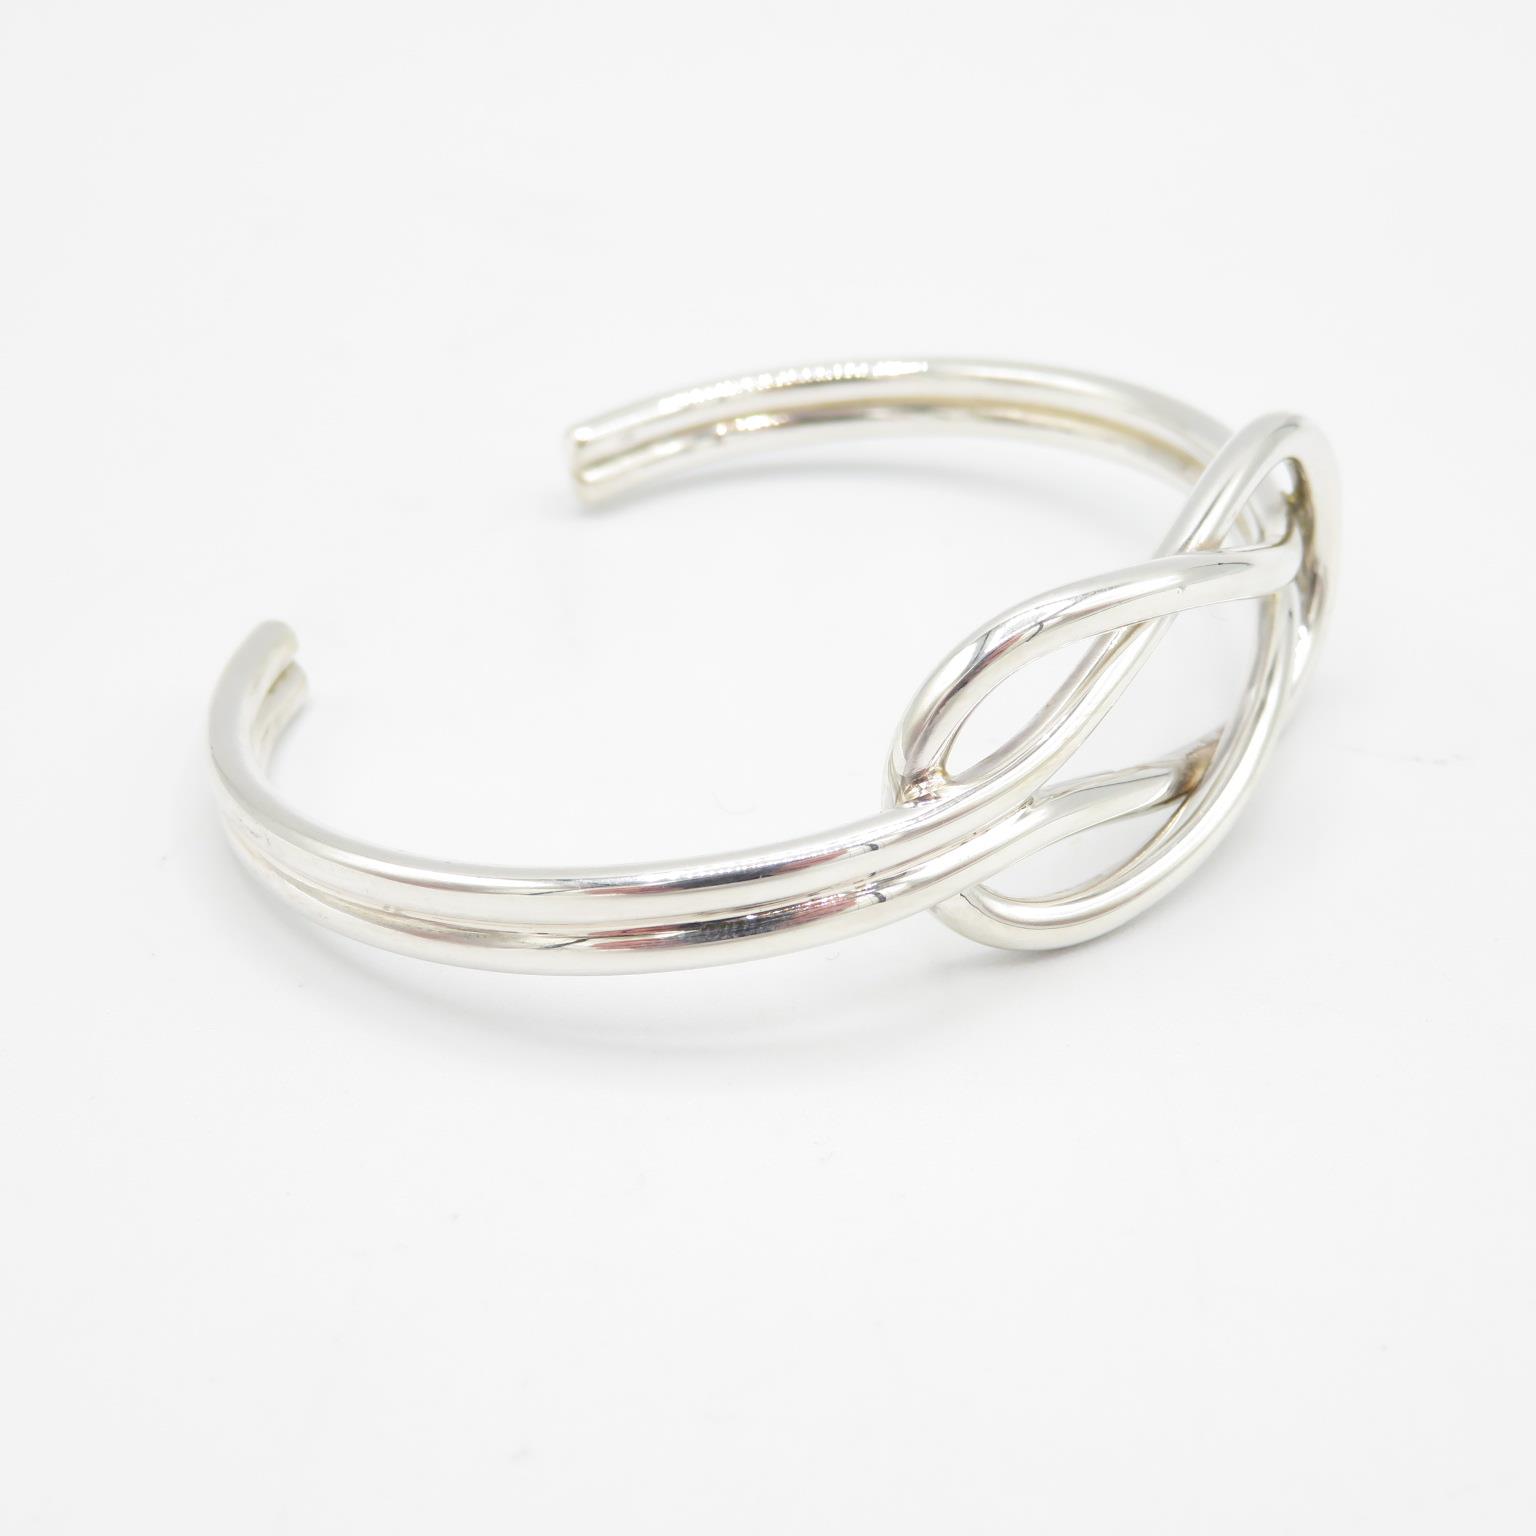 HM 925 Sterling Silver Lover's Knot design bangle - adjustable - (21.5g) In excellent condition - Image 2 of 4